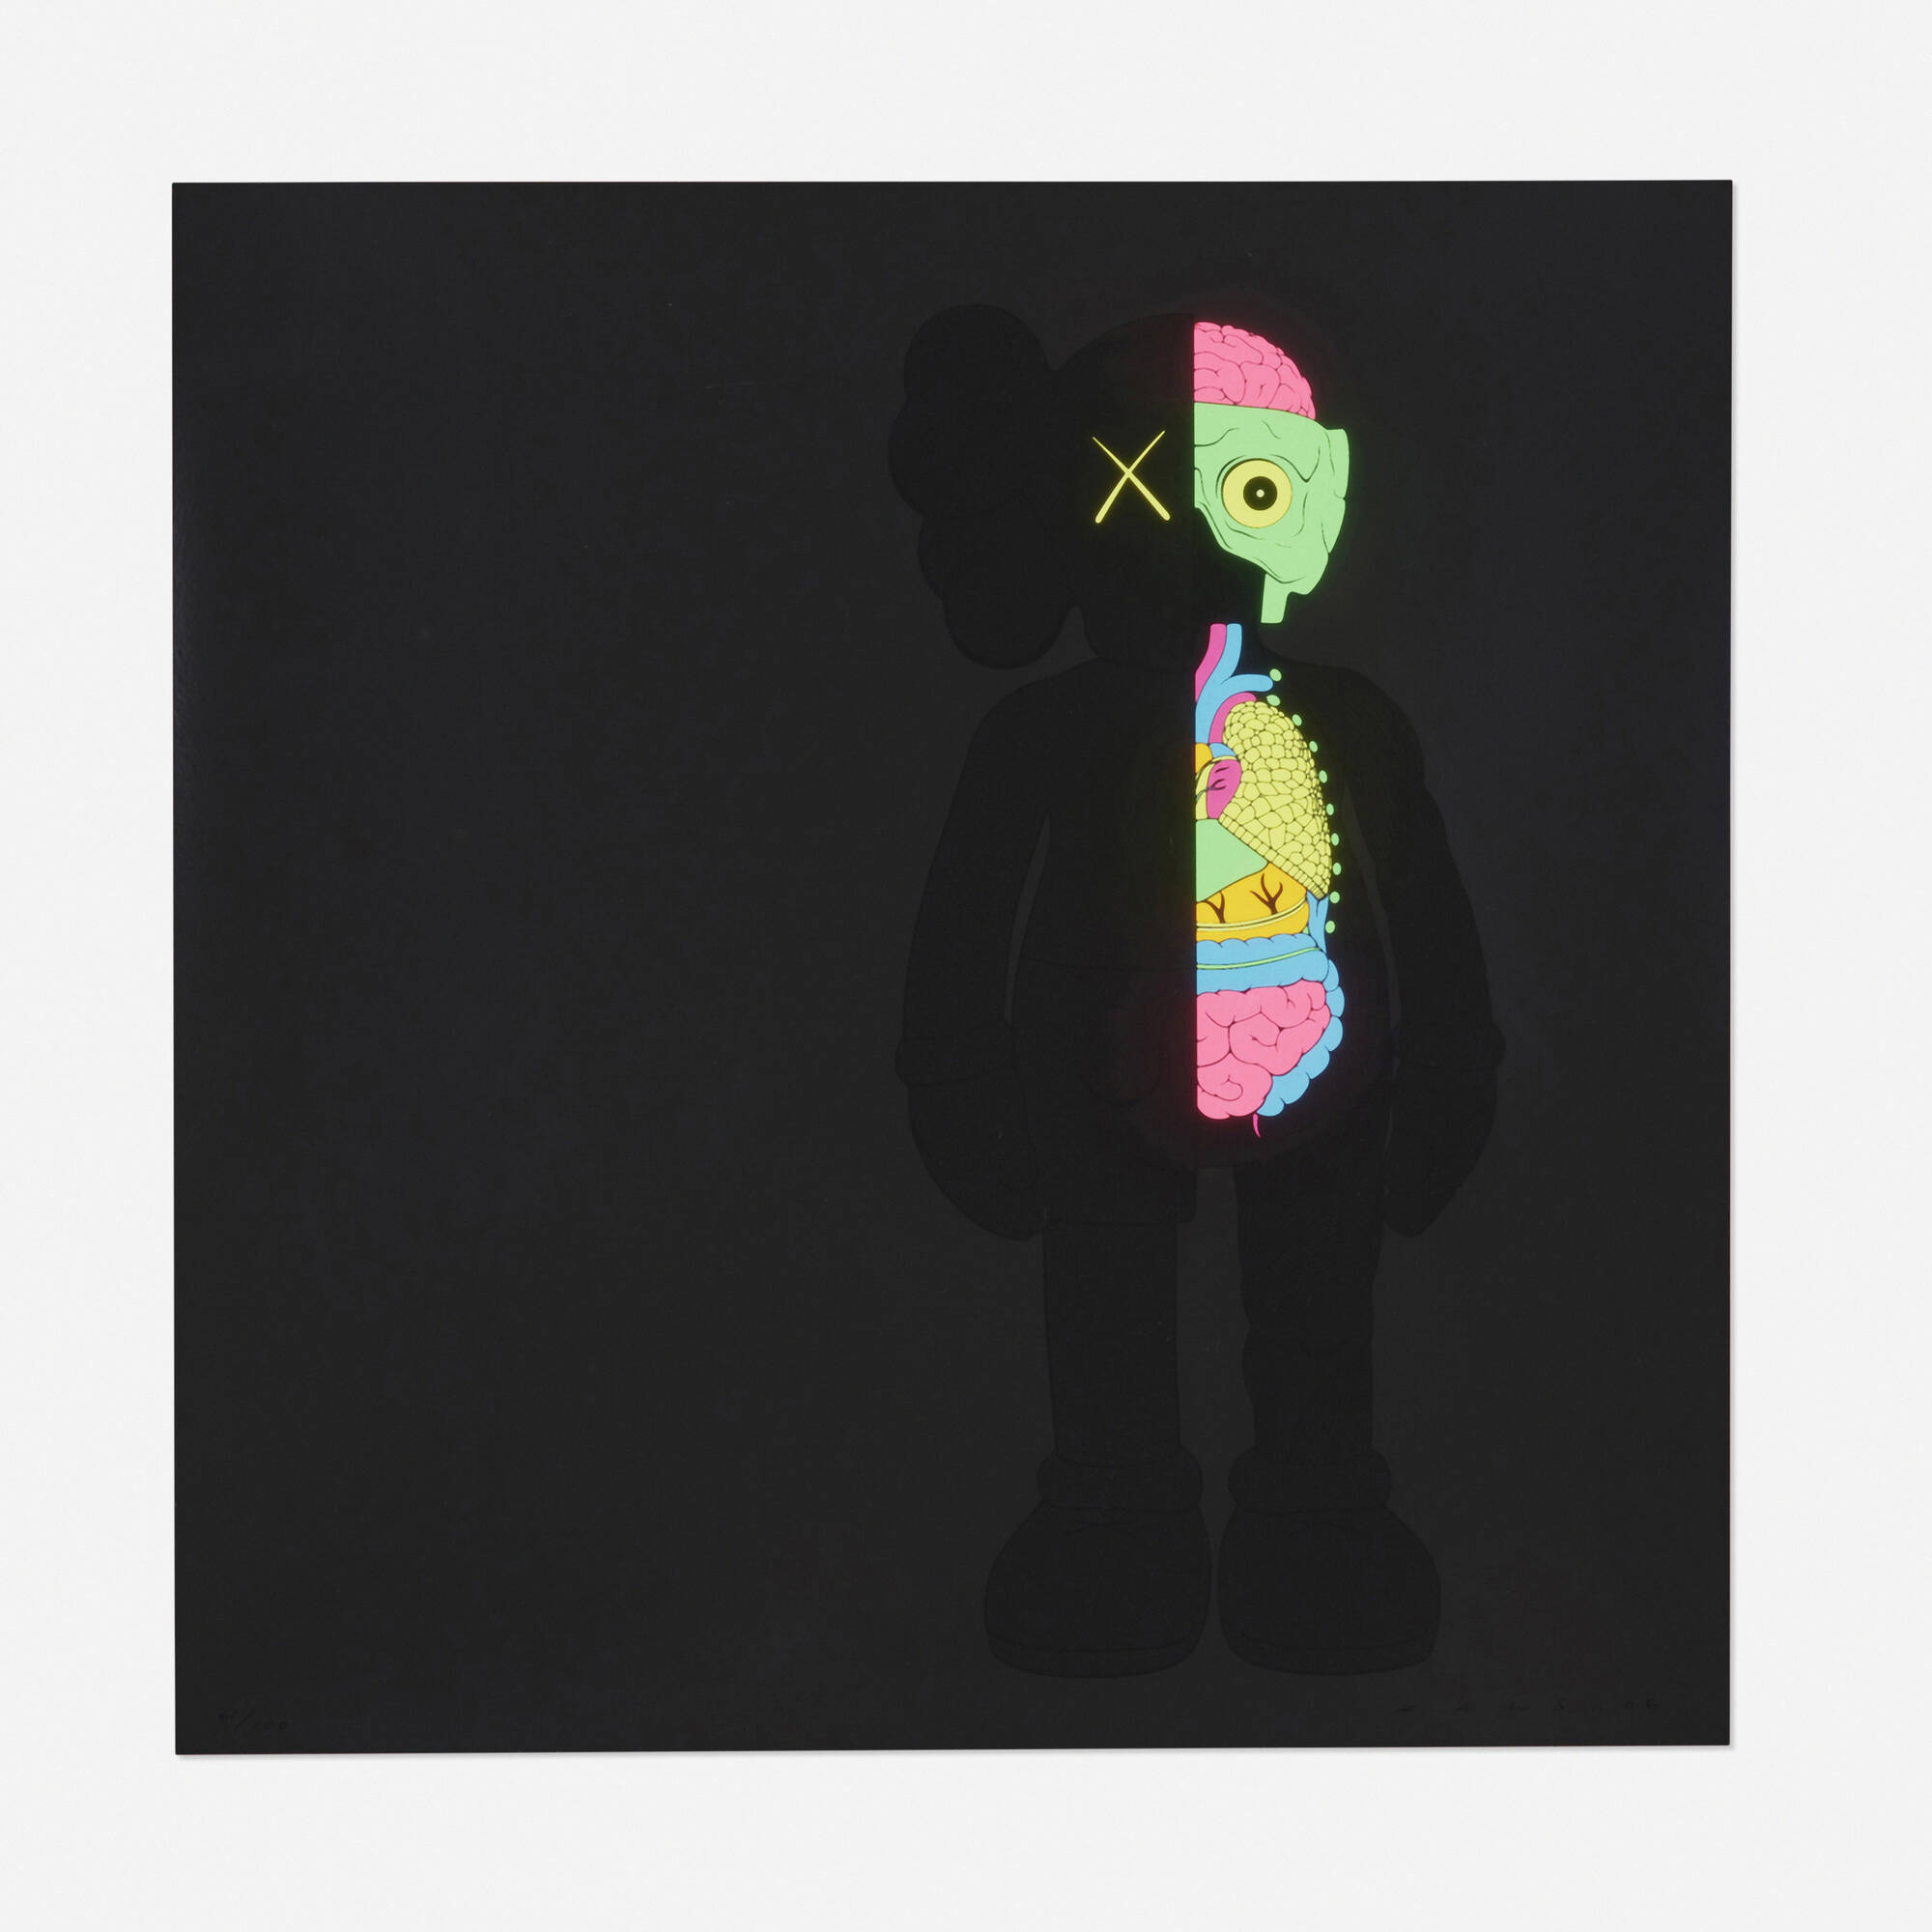 125: KAWS (BRIAN DONNELLY), Dissected Companion (black